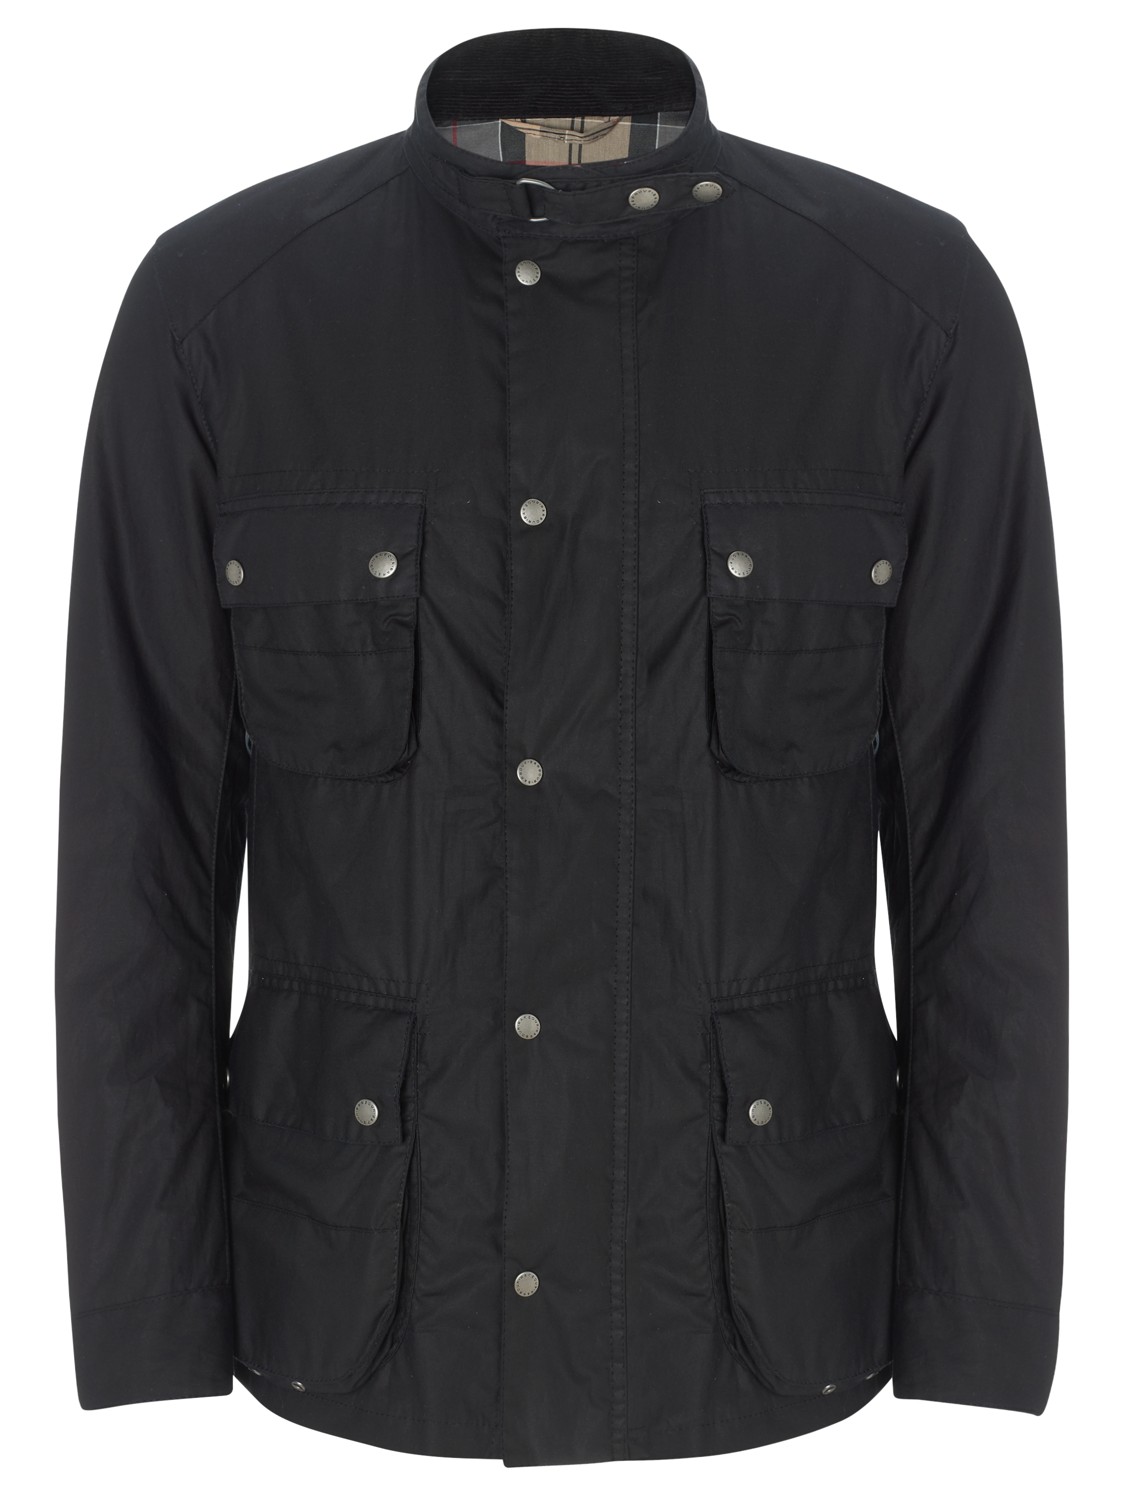 Barbour Mann Wax Cotton Motorcycle Jacket in Black for Men - Lyst